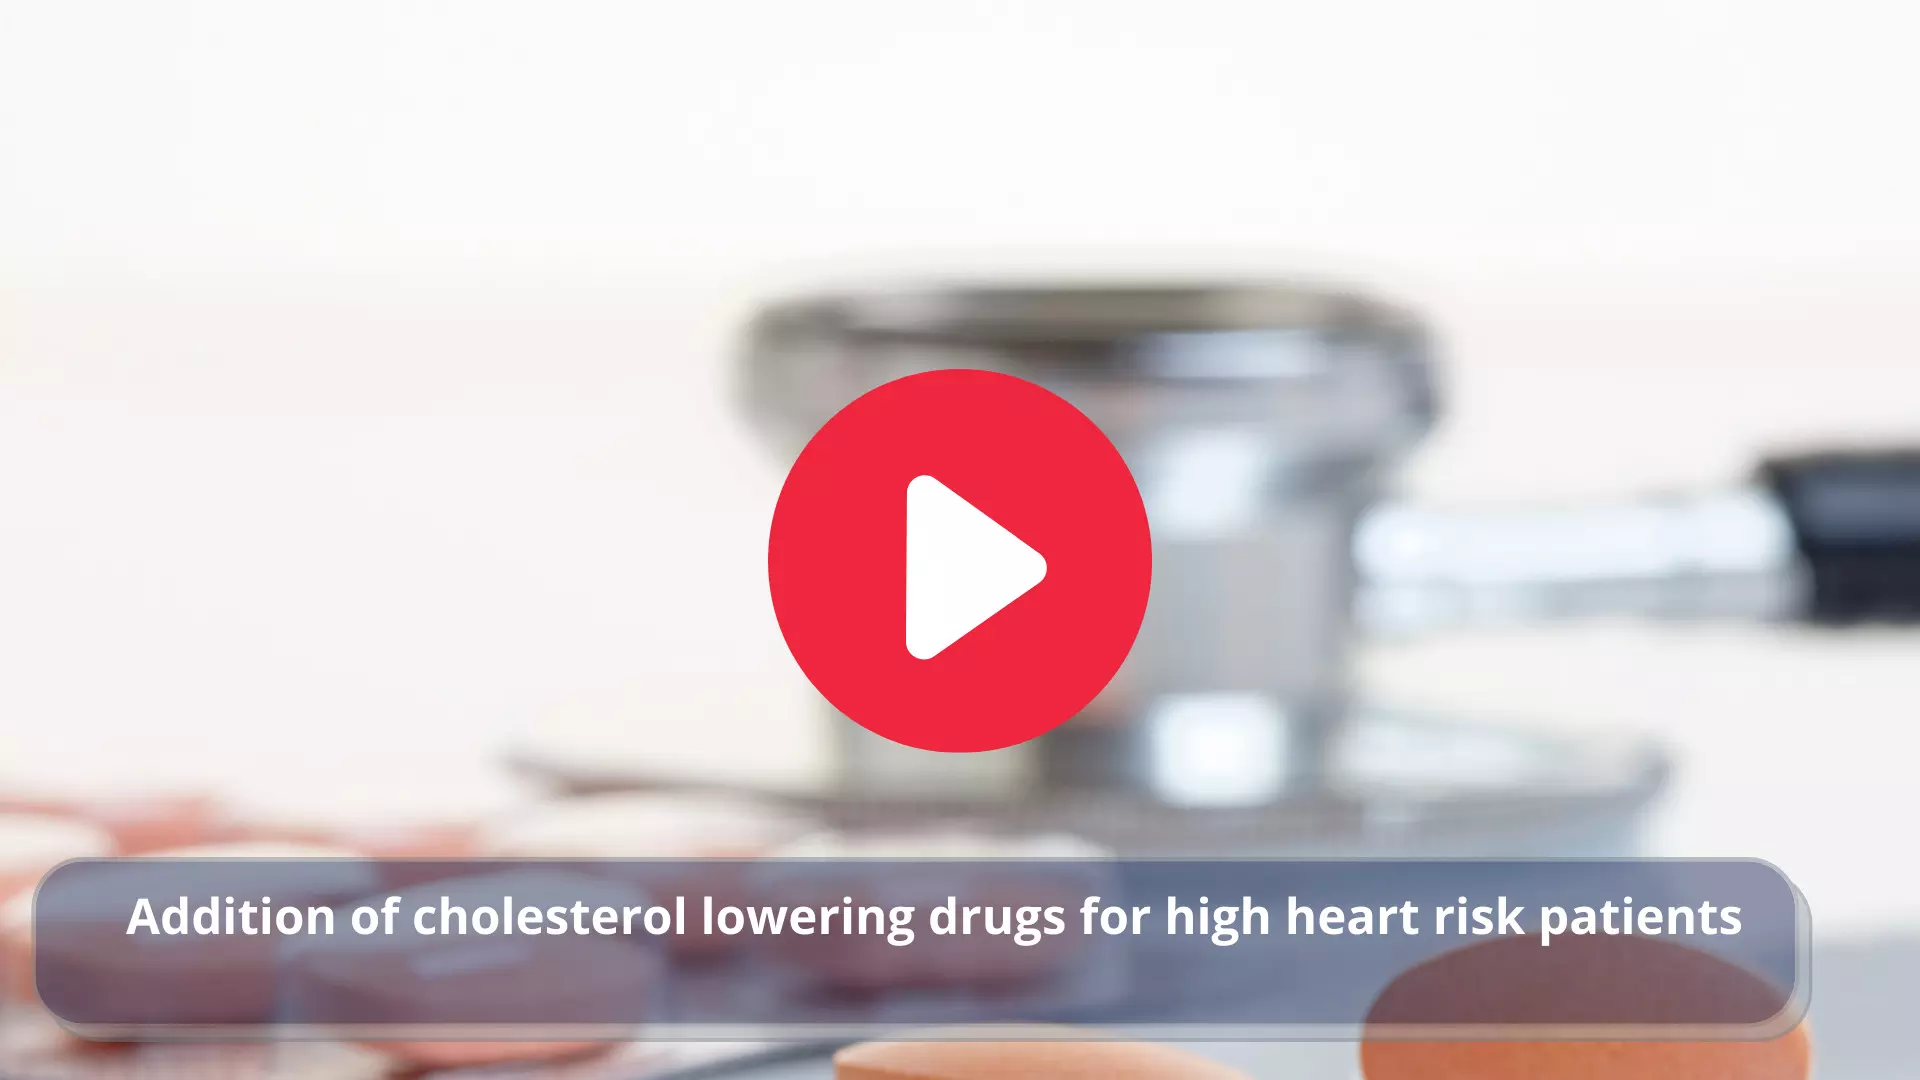 Cholesterol lowering drugs for high heart risk patients must be added